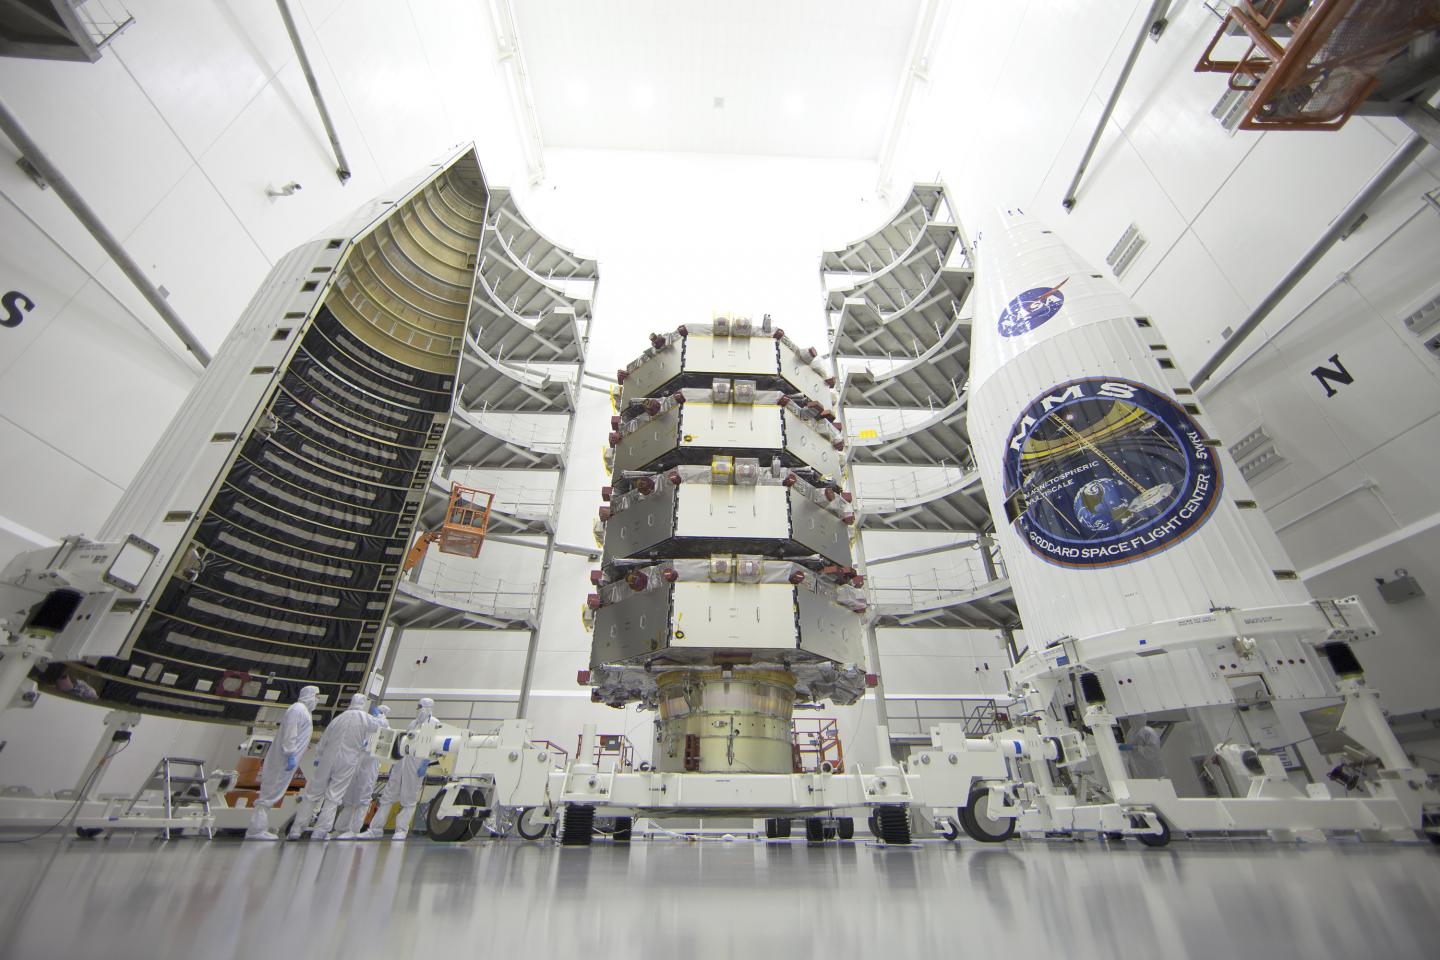 The Four MMS observatories